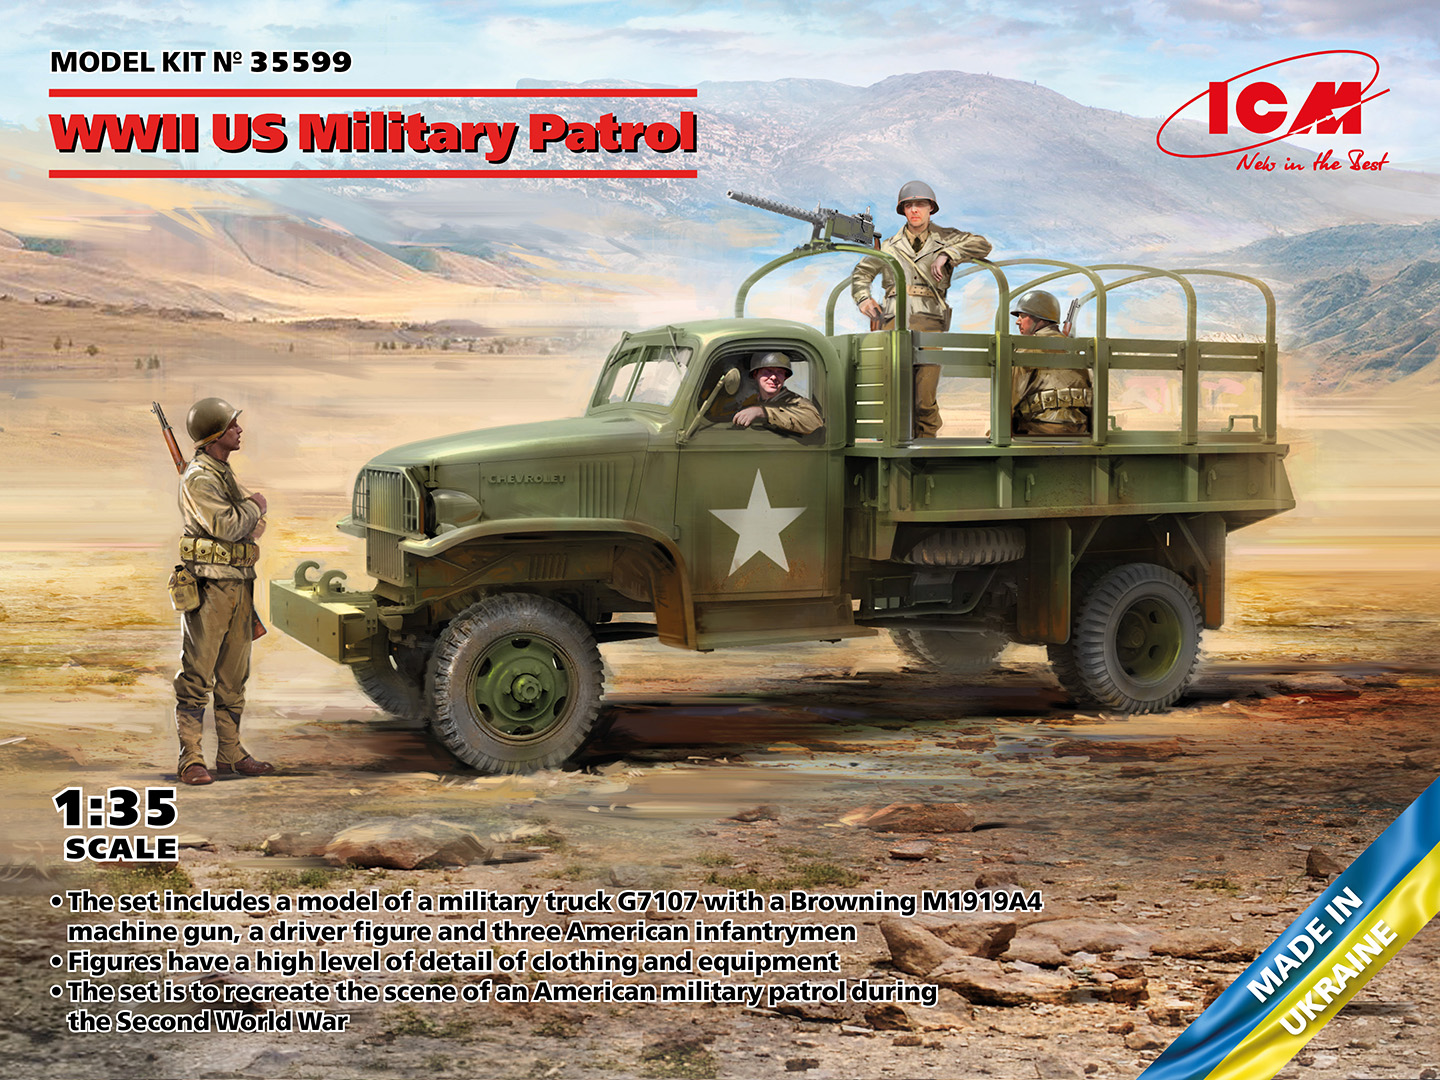 1/35　WWII G7107 米軍パトロール軍用車 w/MG M1919A4